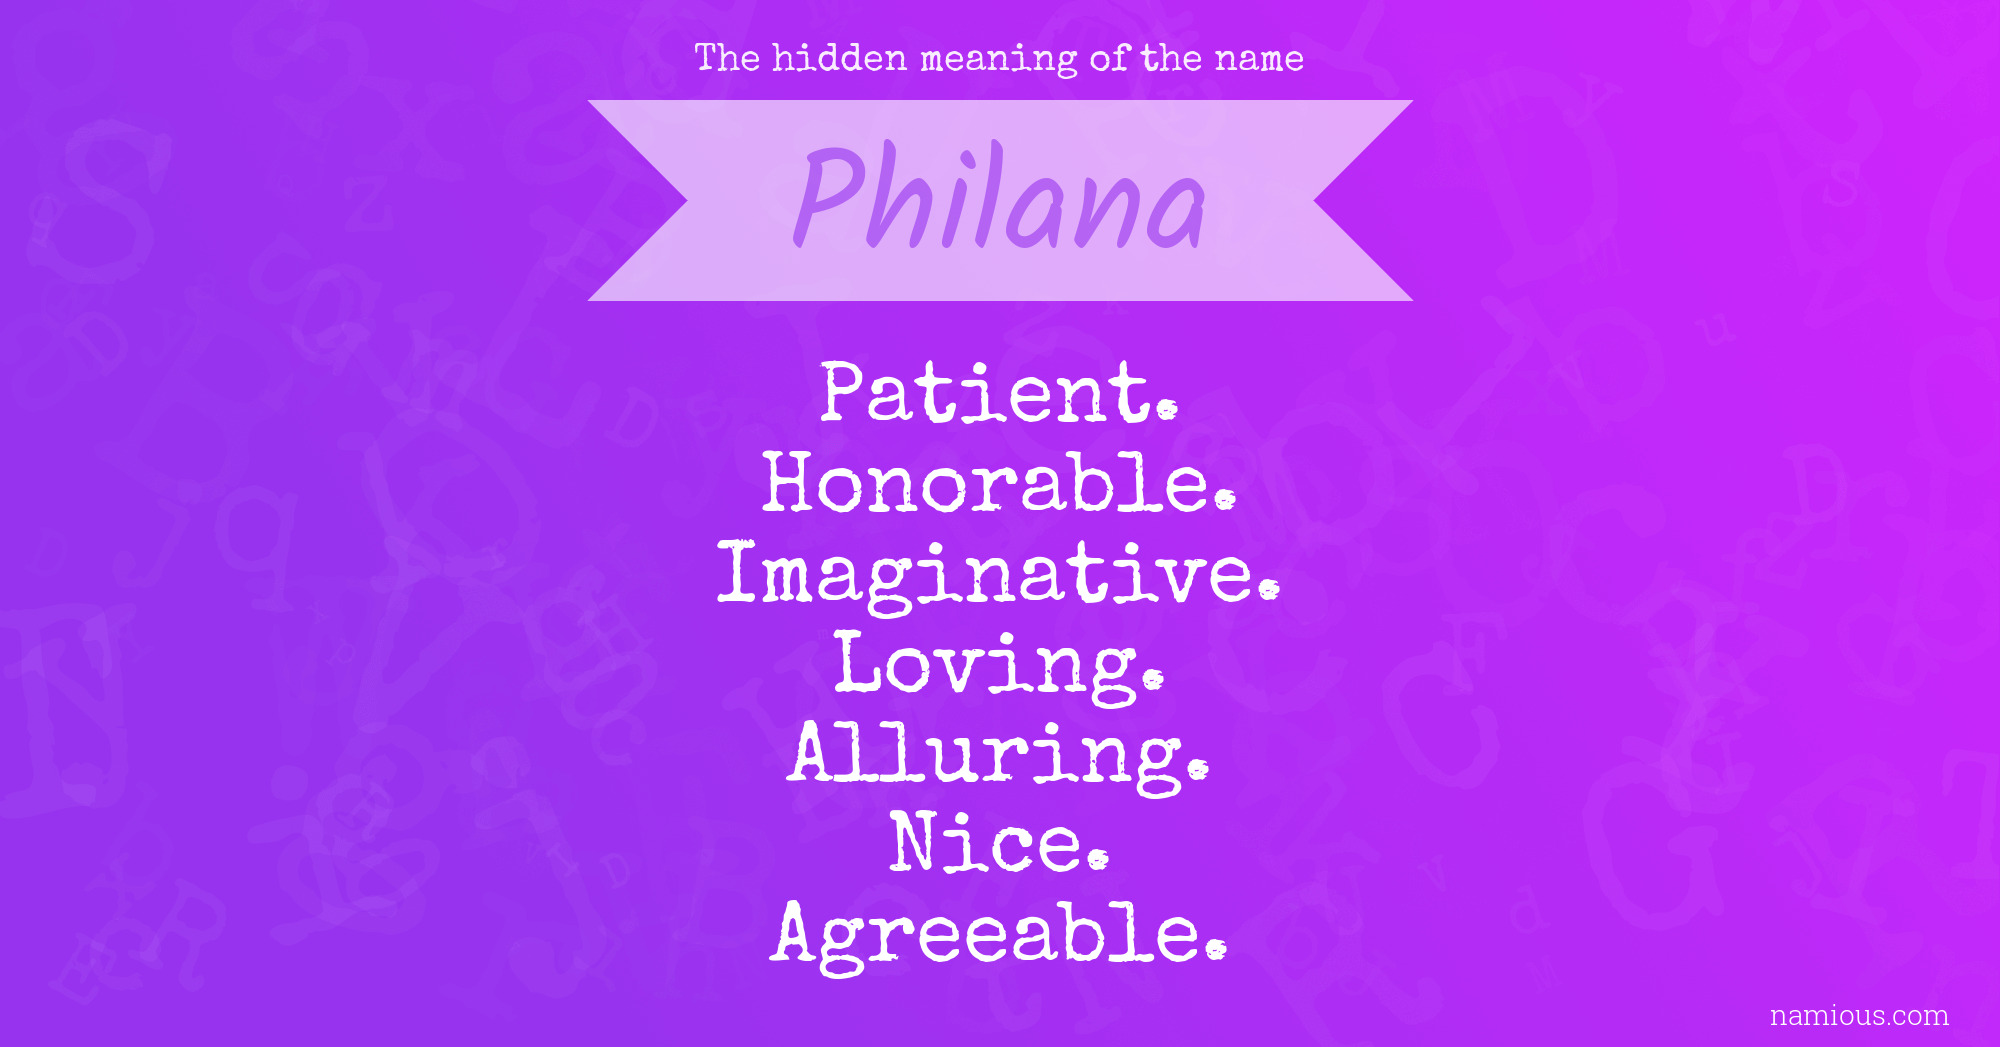 The hidden meaning of the name Philana